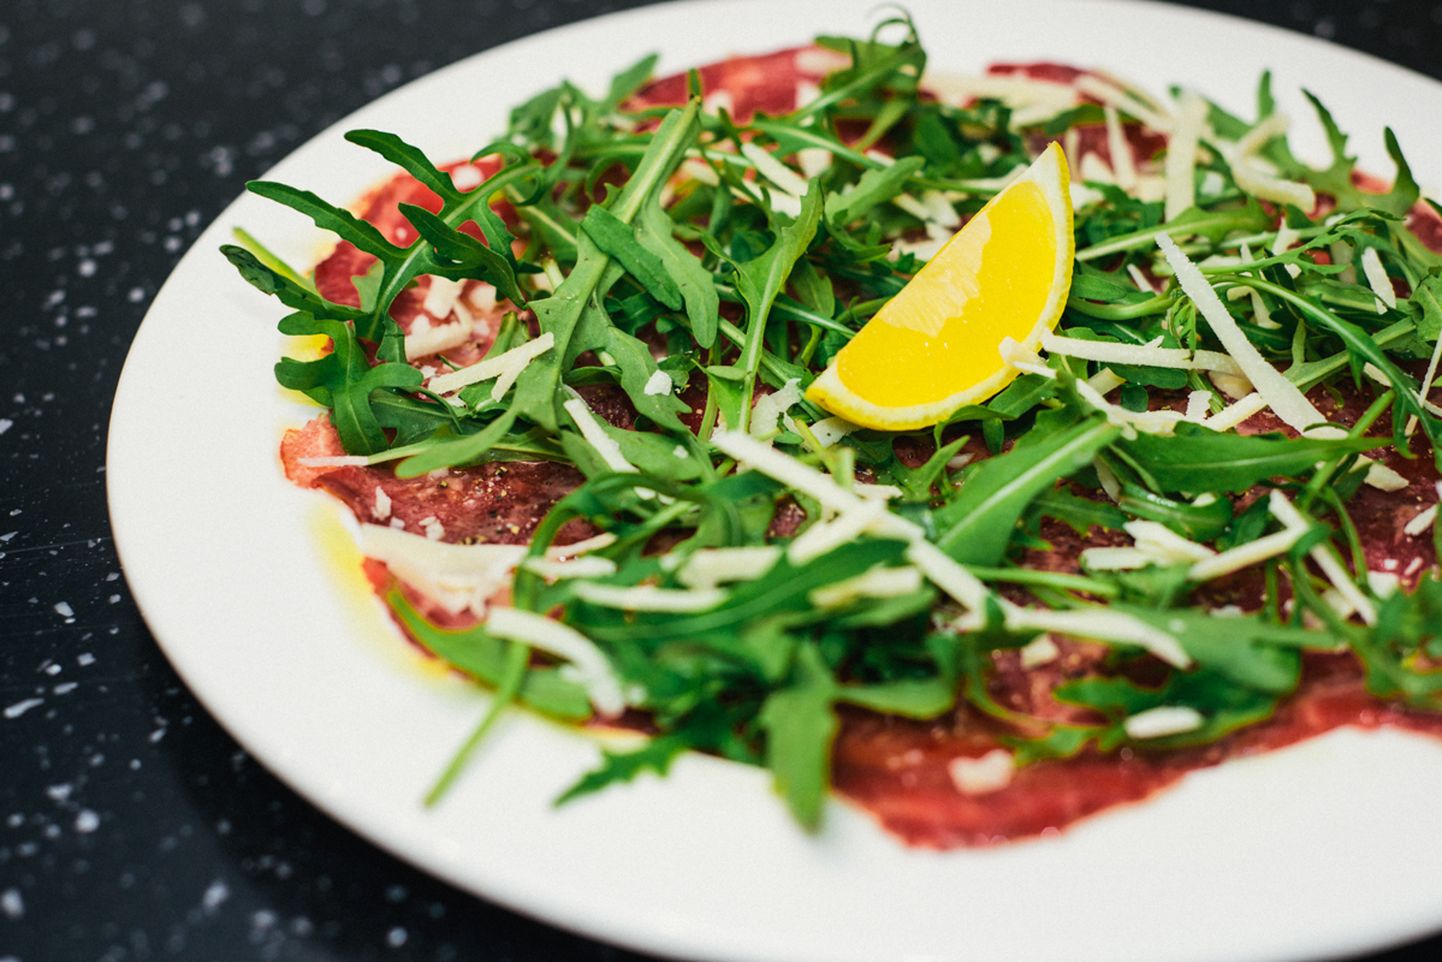 Beef carpaccio: starter based on raw beef, lemon, Parmesan olive oil and rocket